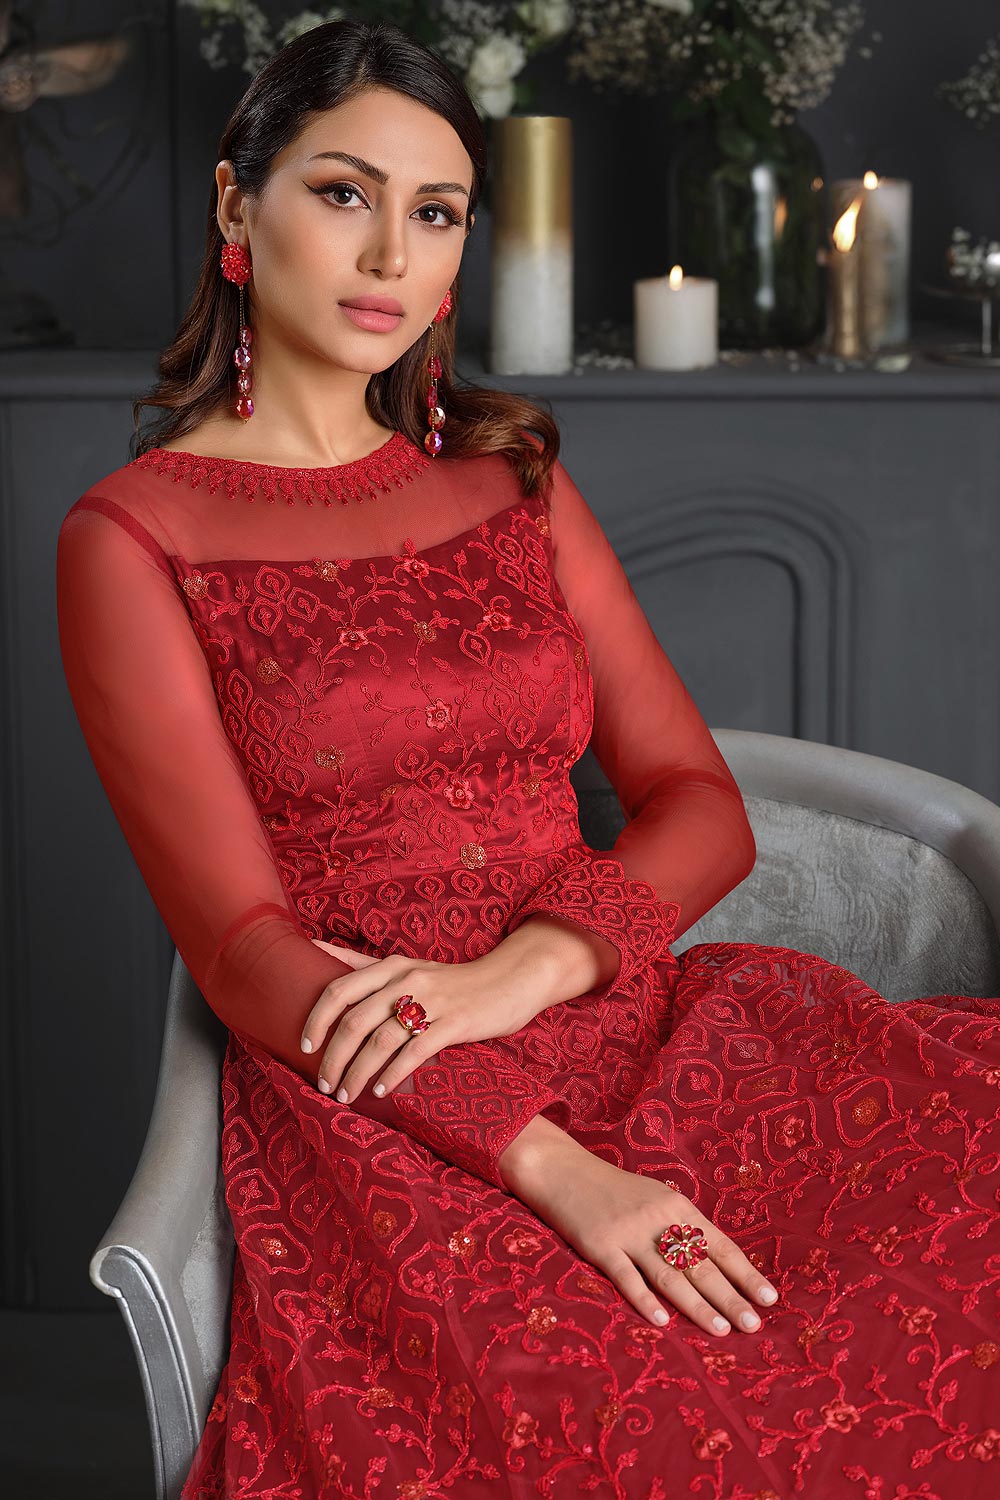 Red Evening Dress With Shawl V-neck Tassels Sleeve A-line Floor-length Lace  Up Appliqued Beads Fancy Prom Gowns Robes De Soirée - AliExpress